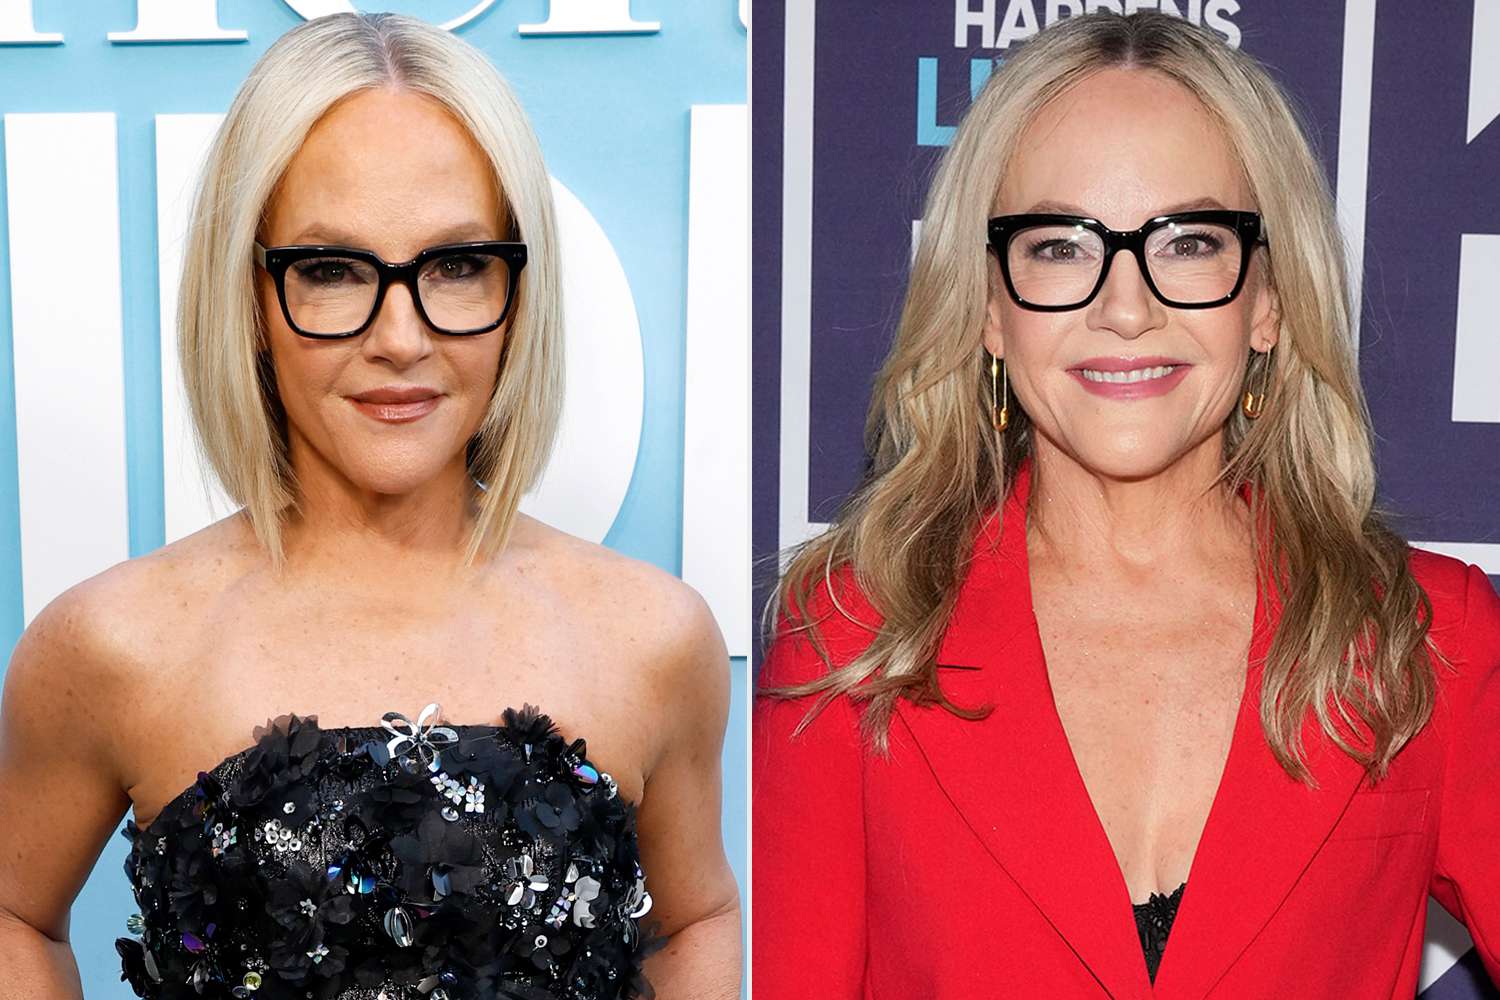 Rachael Harris Chops Off Her Hair in Dramatic Transformation (Exclusive)